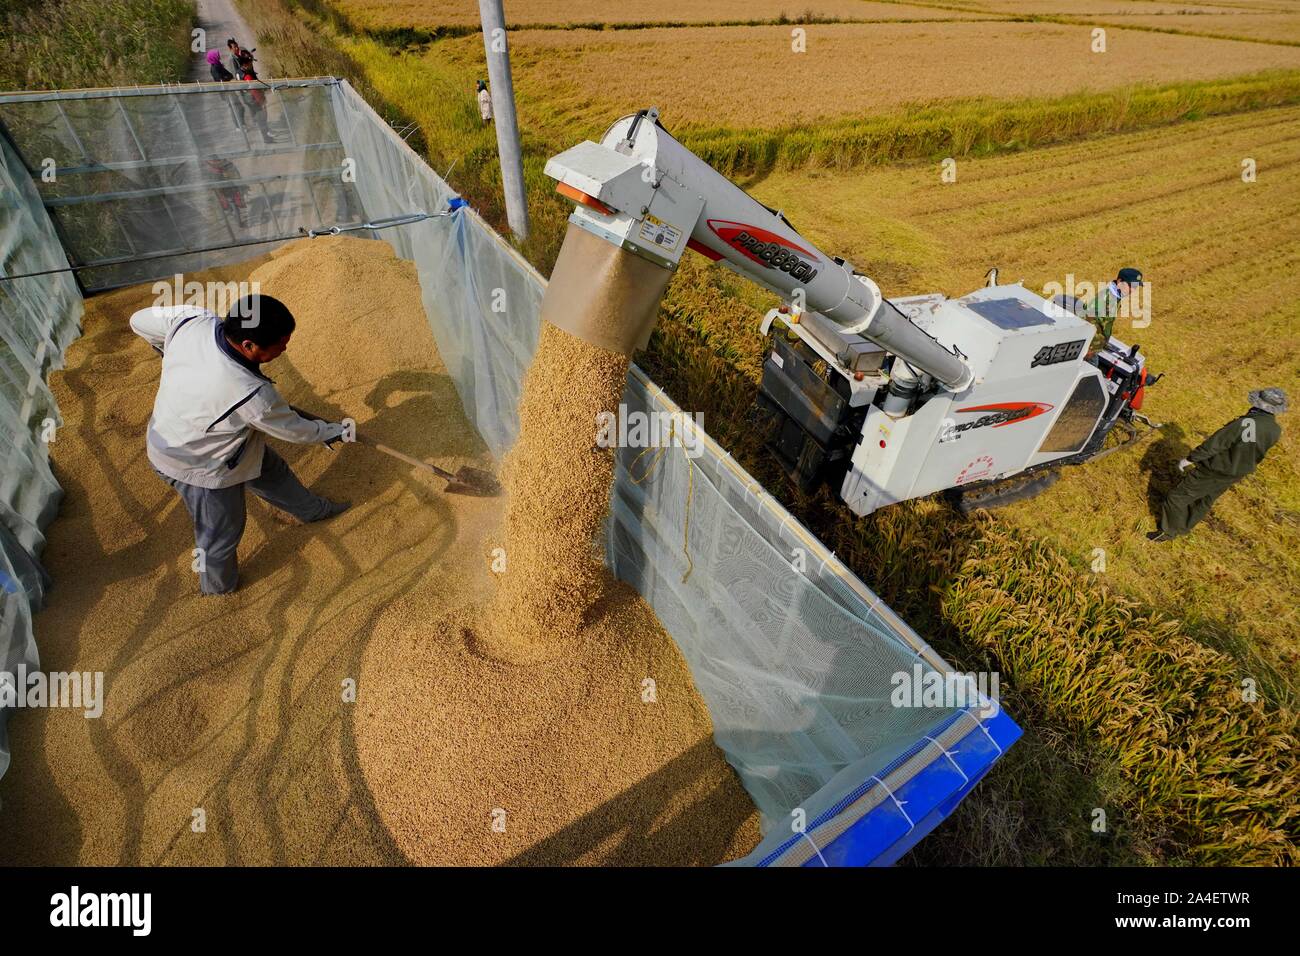 Tangshan. 14th Oct, 2019. Aerial Photo taken on Oct. 14, 2019 shows farmers loading harvested rice in Caofeidian District of Tangshan City, north China's Hebei Province. Over 21,000 hectares of paddy field in Caofeidian District has entered harvest season recently. Credit: Yang Shiyao/Xinhua/Alamy Live News Stock Photo